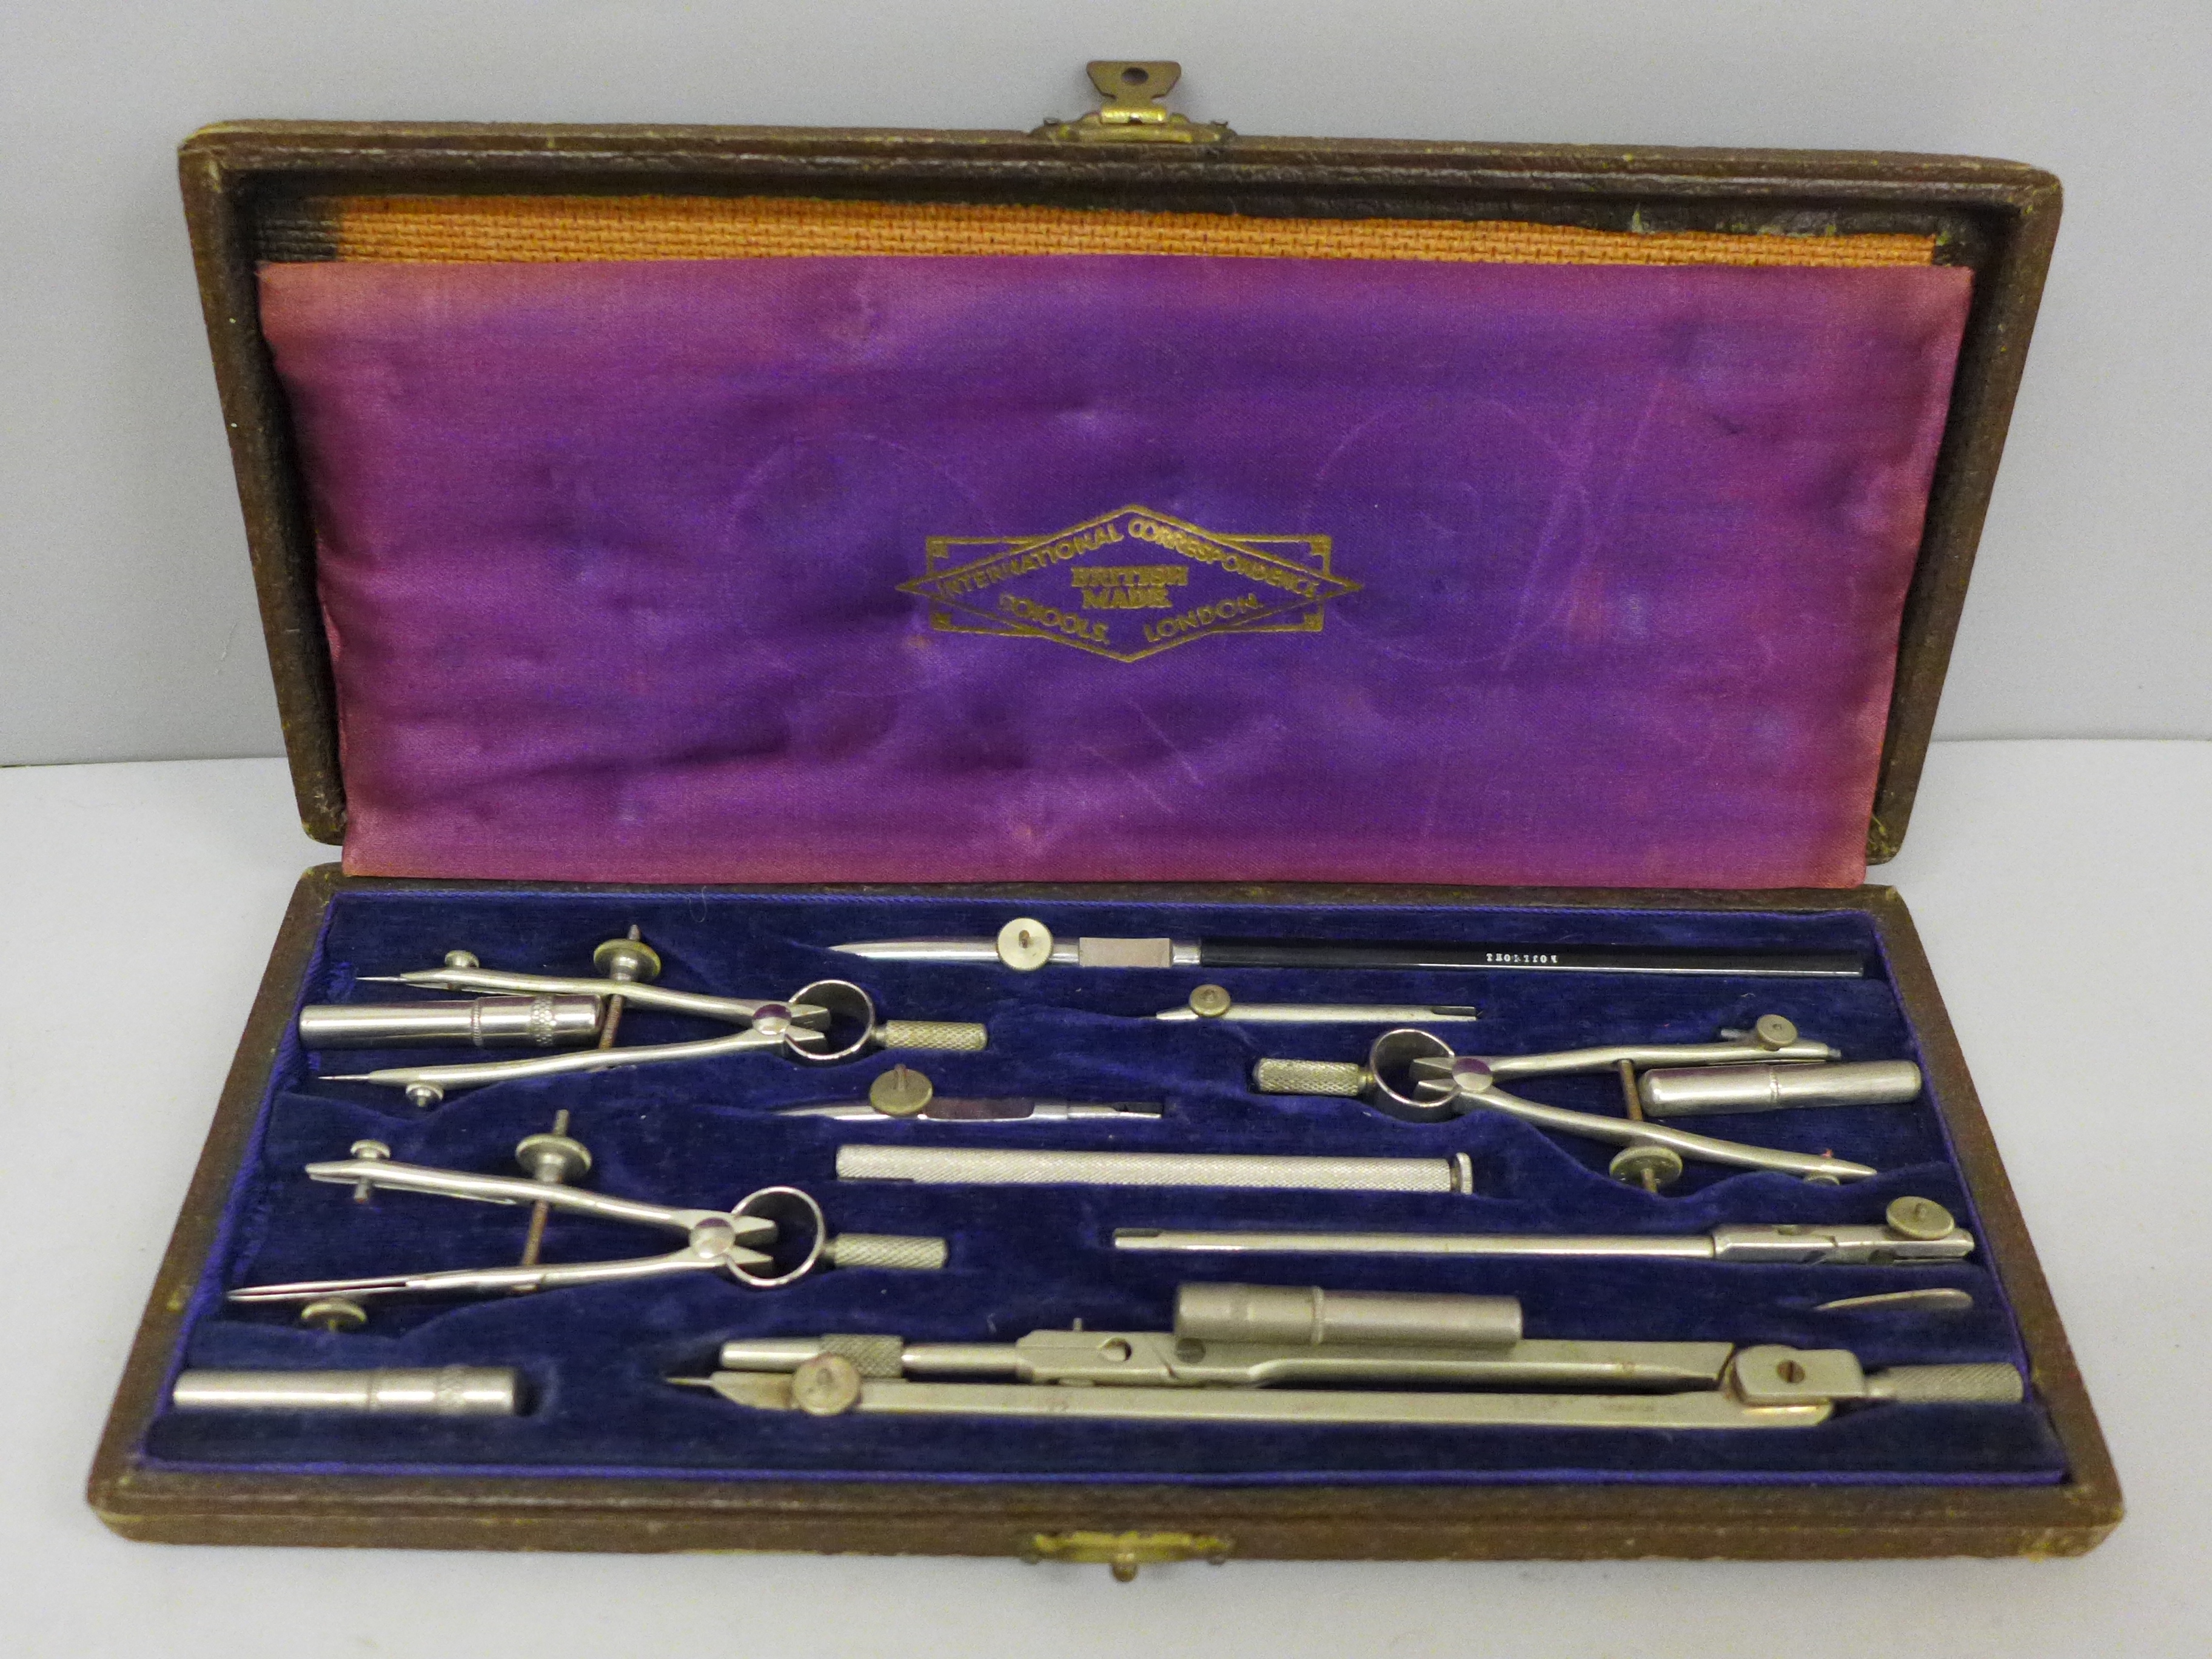 A cased set of technical drawing instruments, International Correspondence School, London